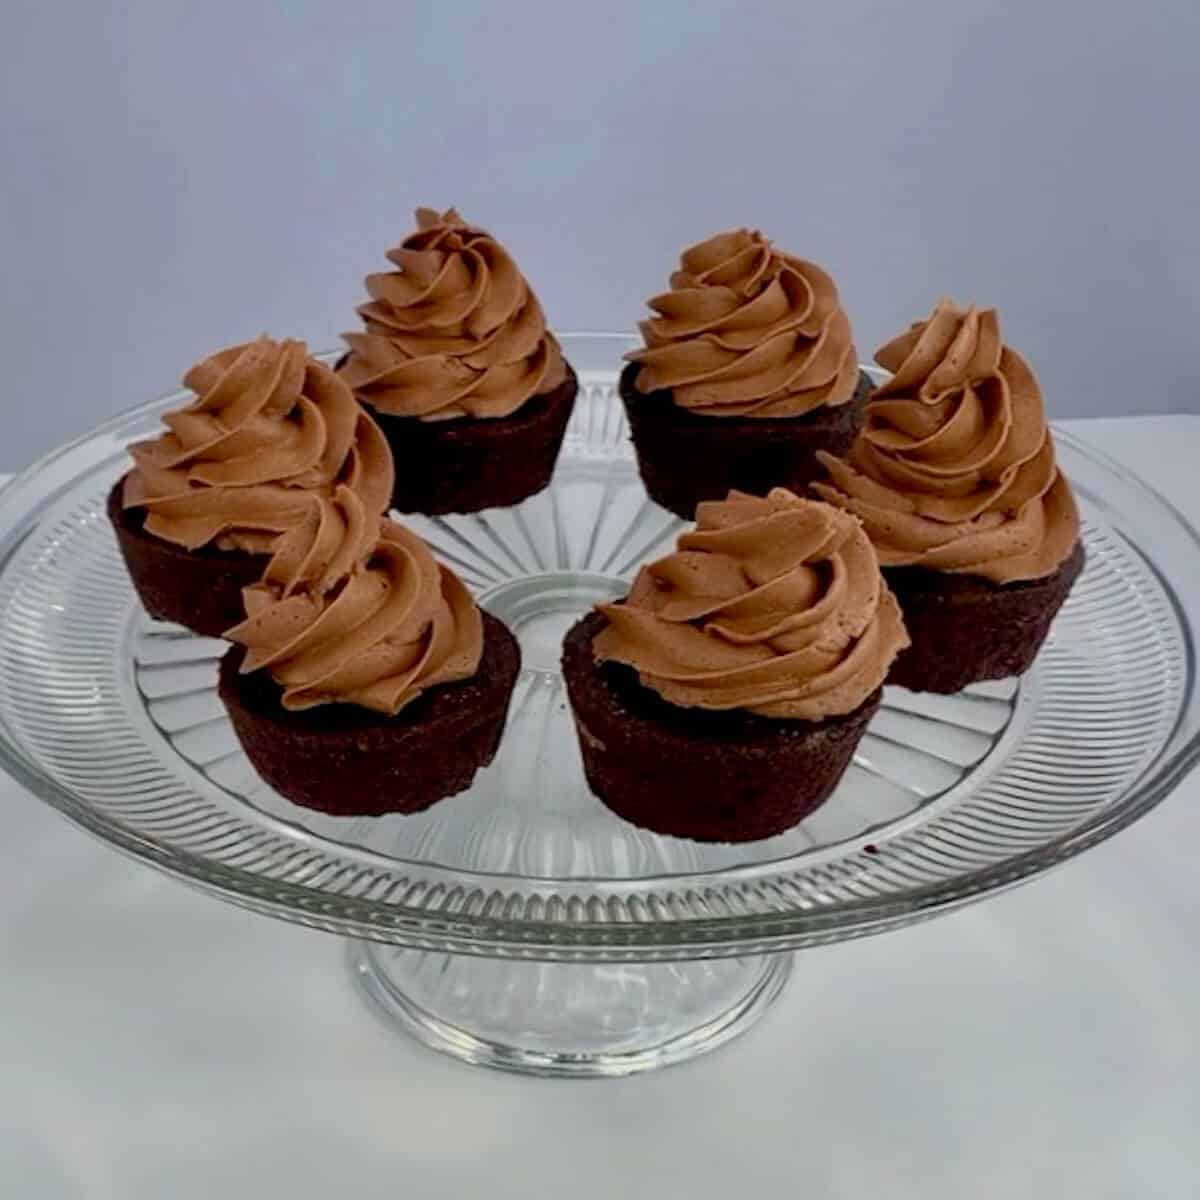 Six frosted chocolate cupcakes on a glass cake stand.